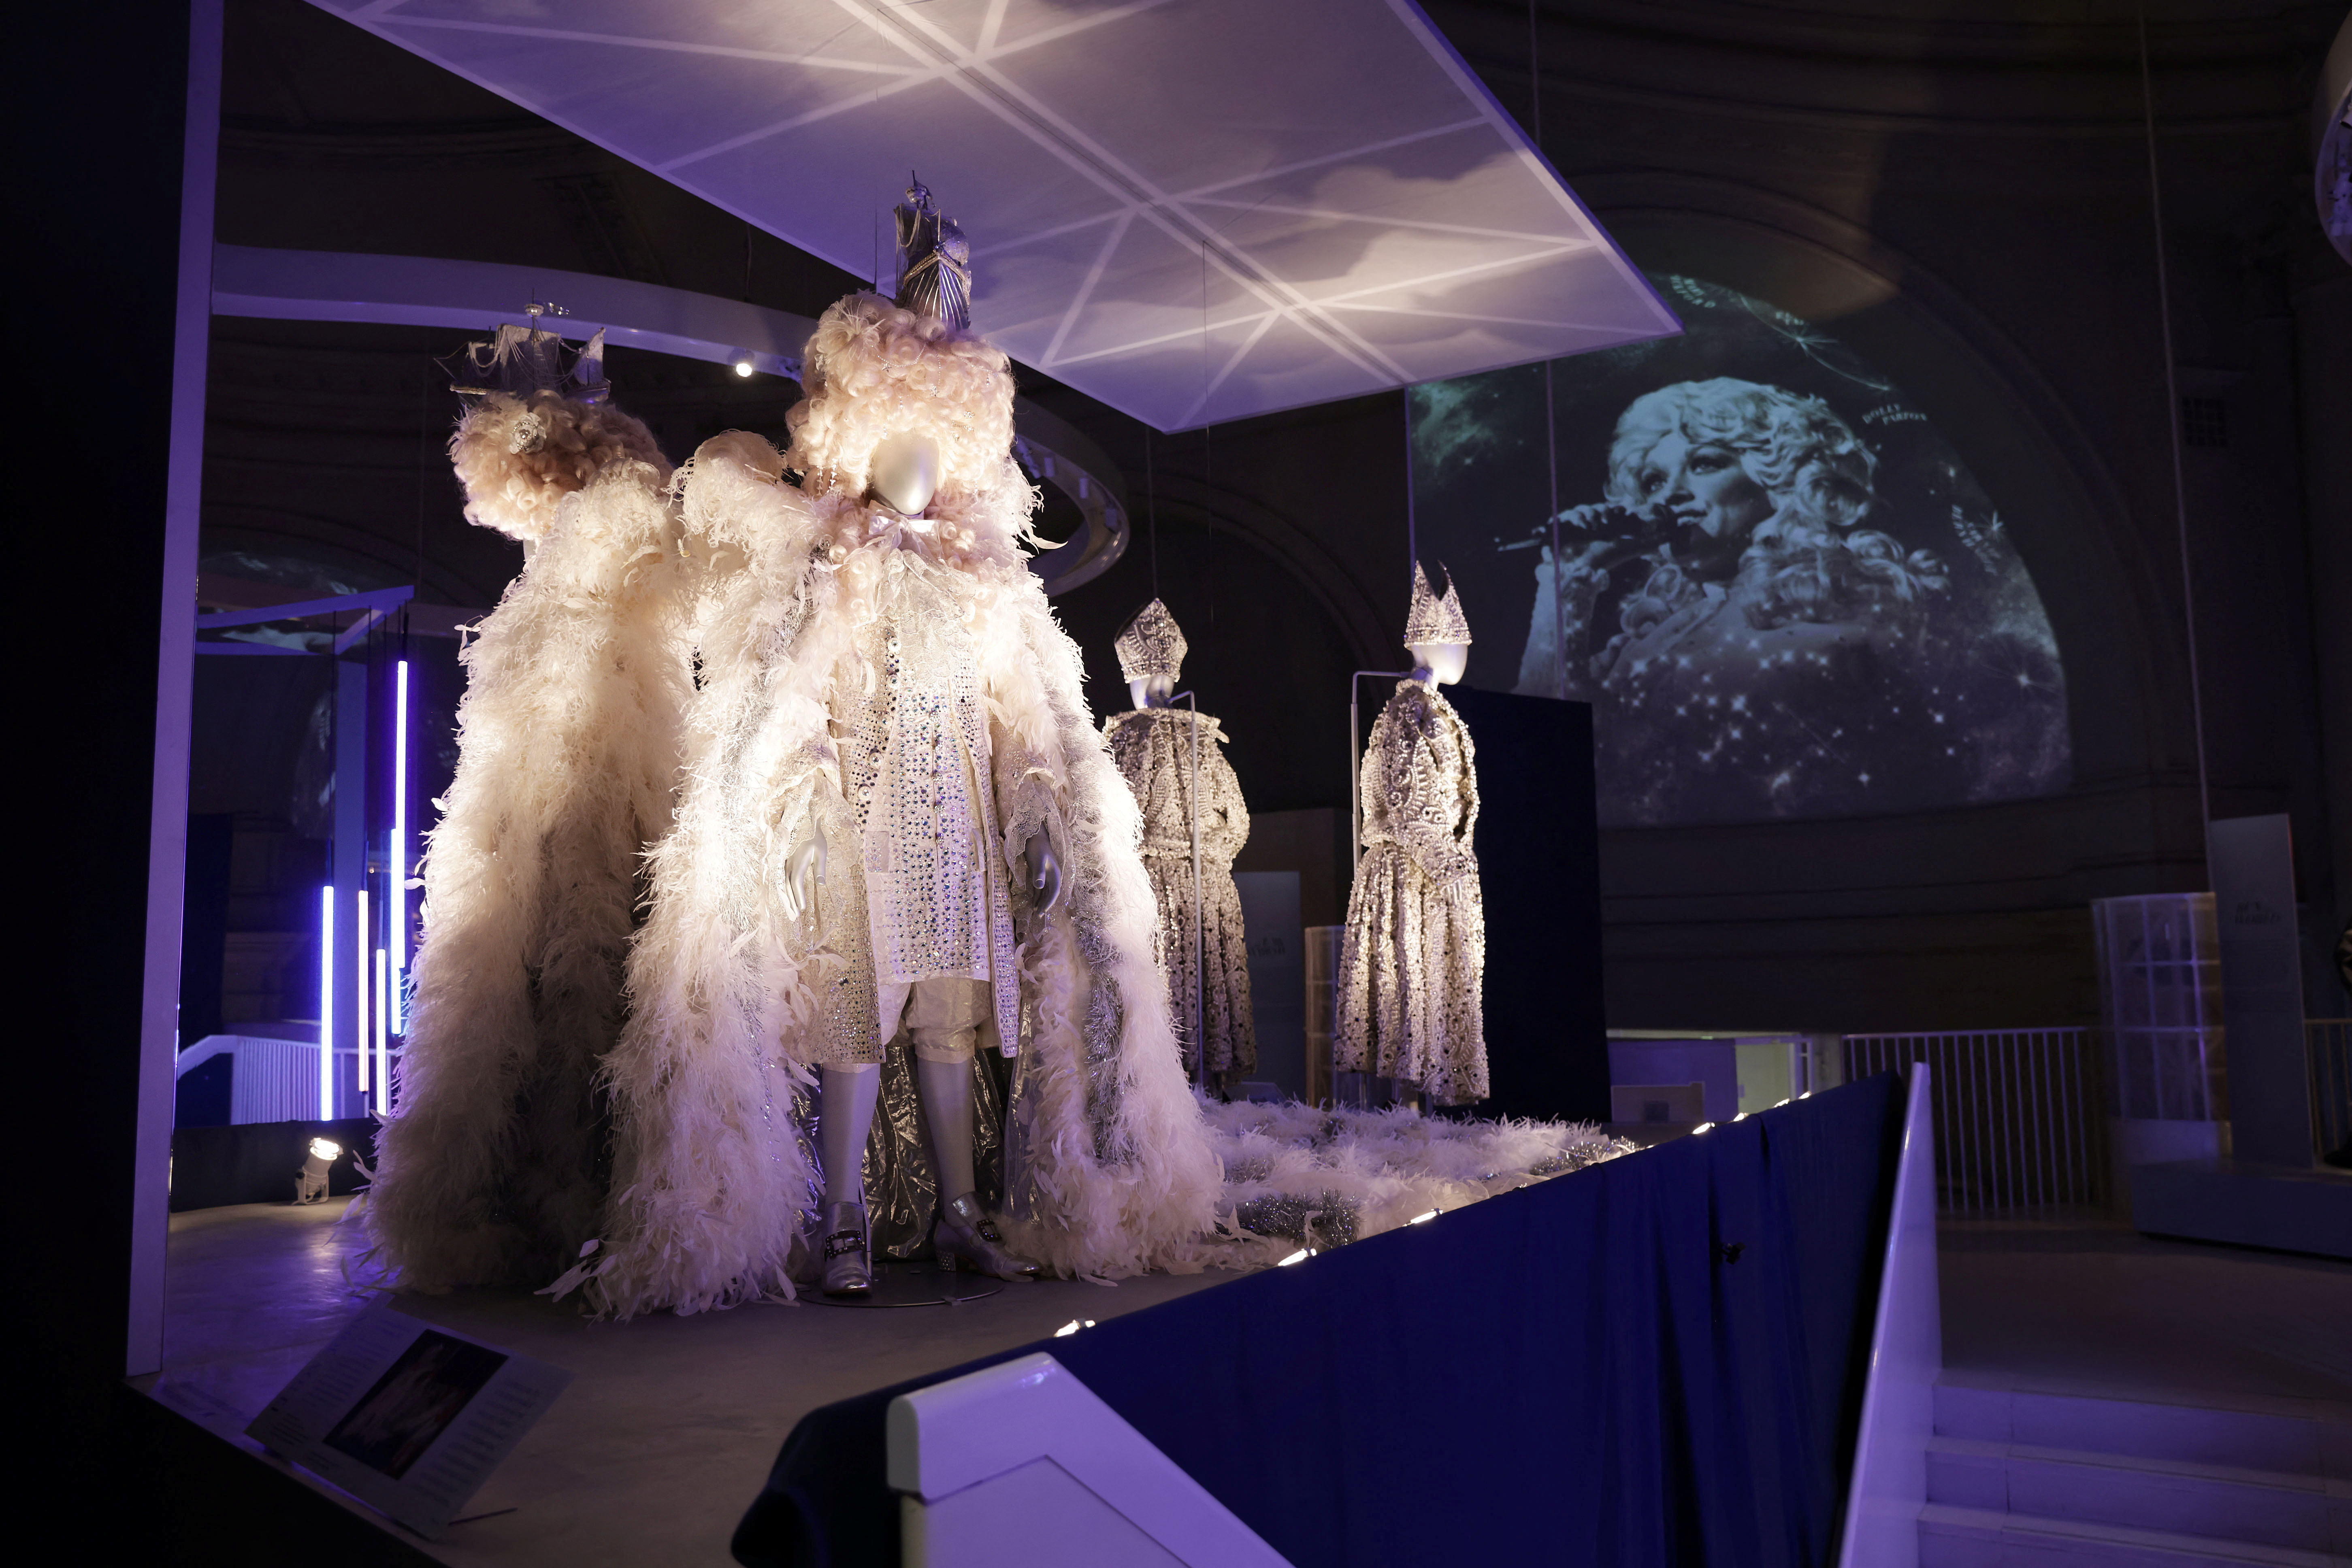 In Pictures: V&A prepares for Diva exhibition launch